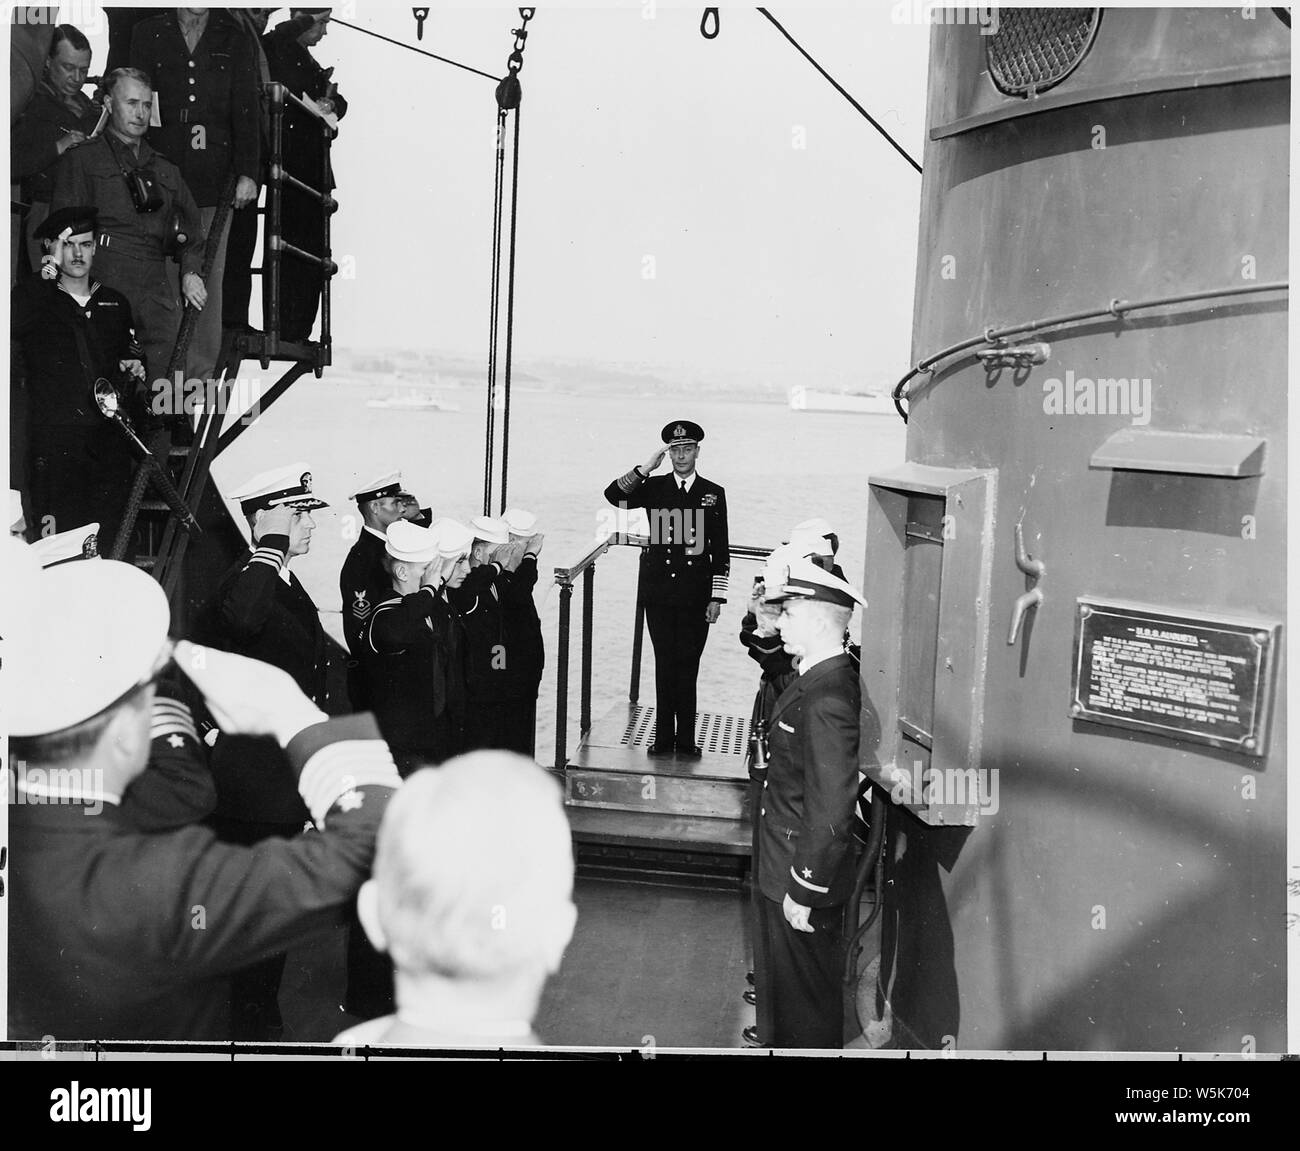 British King George VI pays a visit to President Harry S. Truman aboard the U. S. S. Augusta, in waters off Plymouth, England. President Truman is preparing to return to the United States after attending thek Potsdam Conference in Germany. Stock Photo